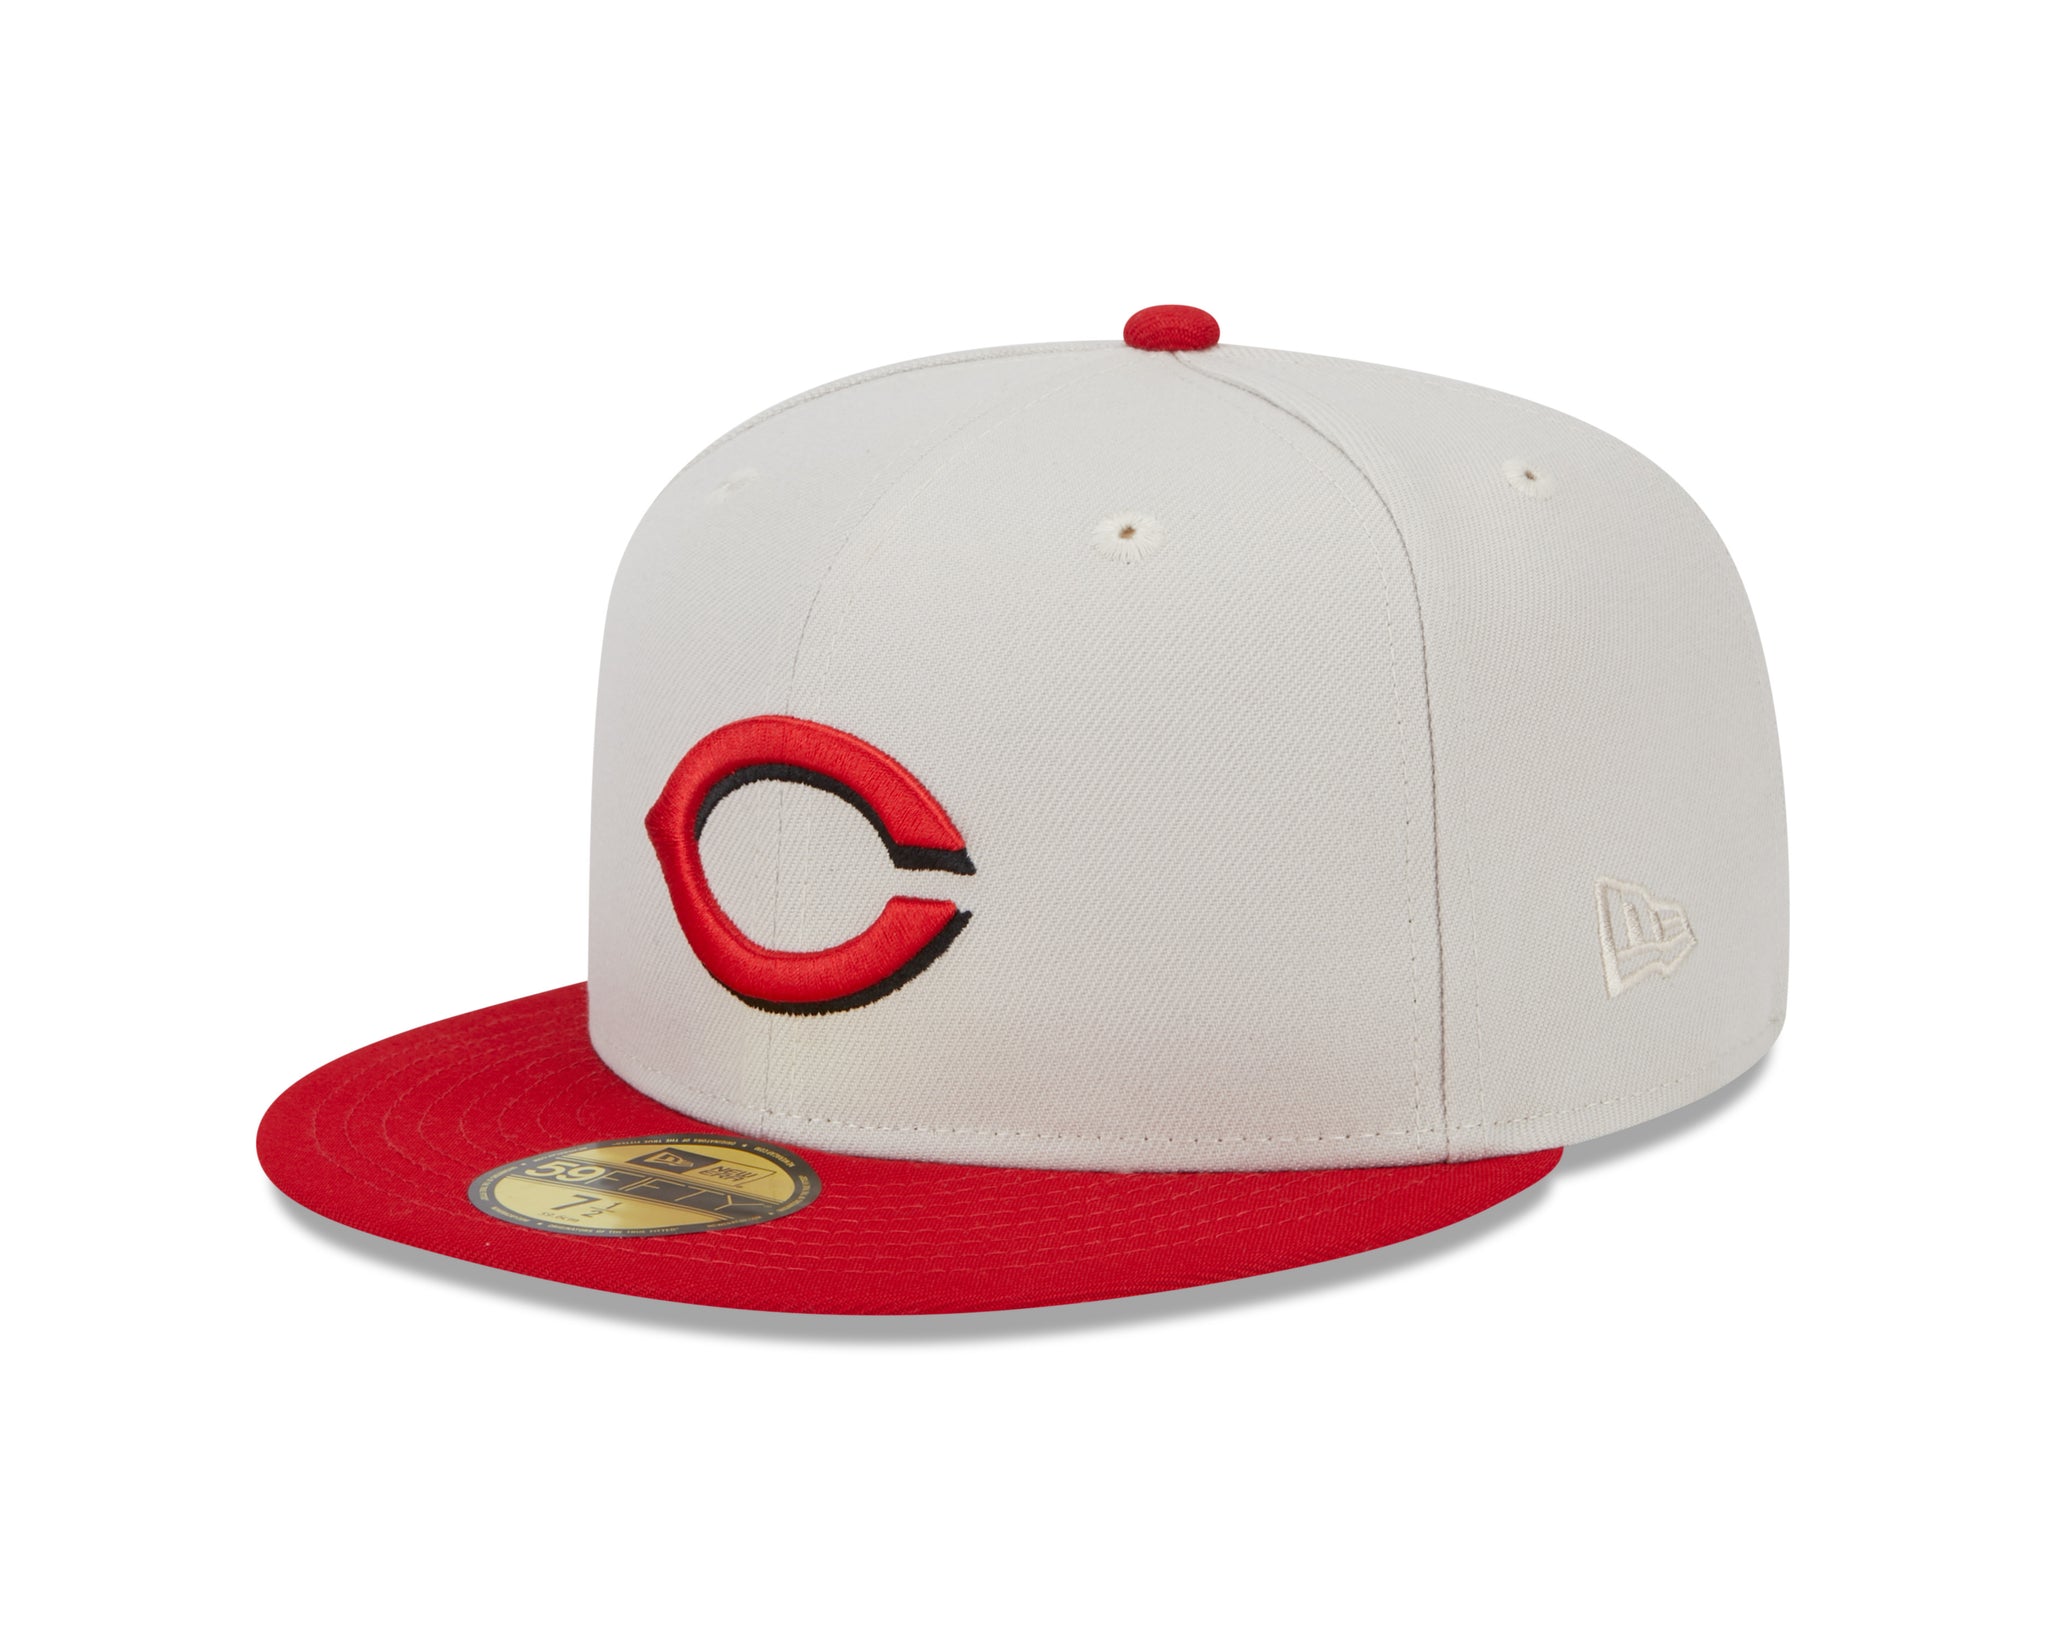 New Era Cincinnati Reds 59FIFTY Authentic Collection Hat Black/Red 7 7/8